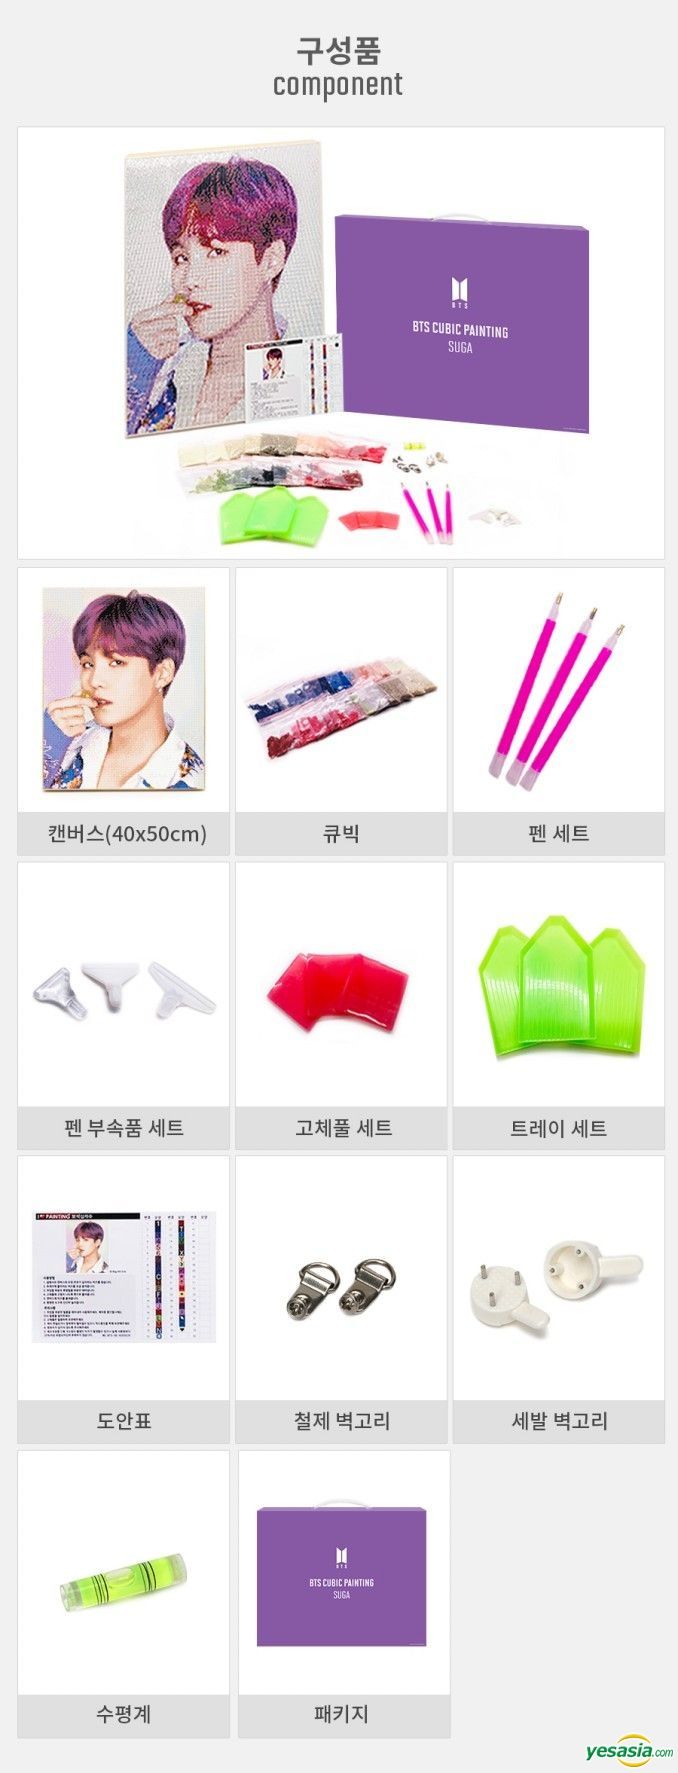 YESASIA: BTS - Cubic Painting 2 (Suga) Celebrity Gifts,男性 ...